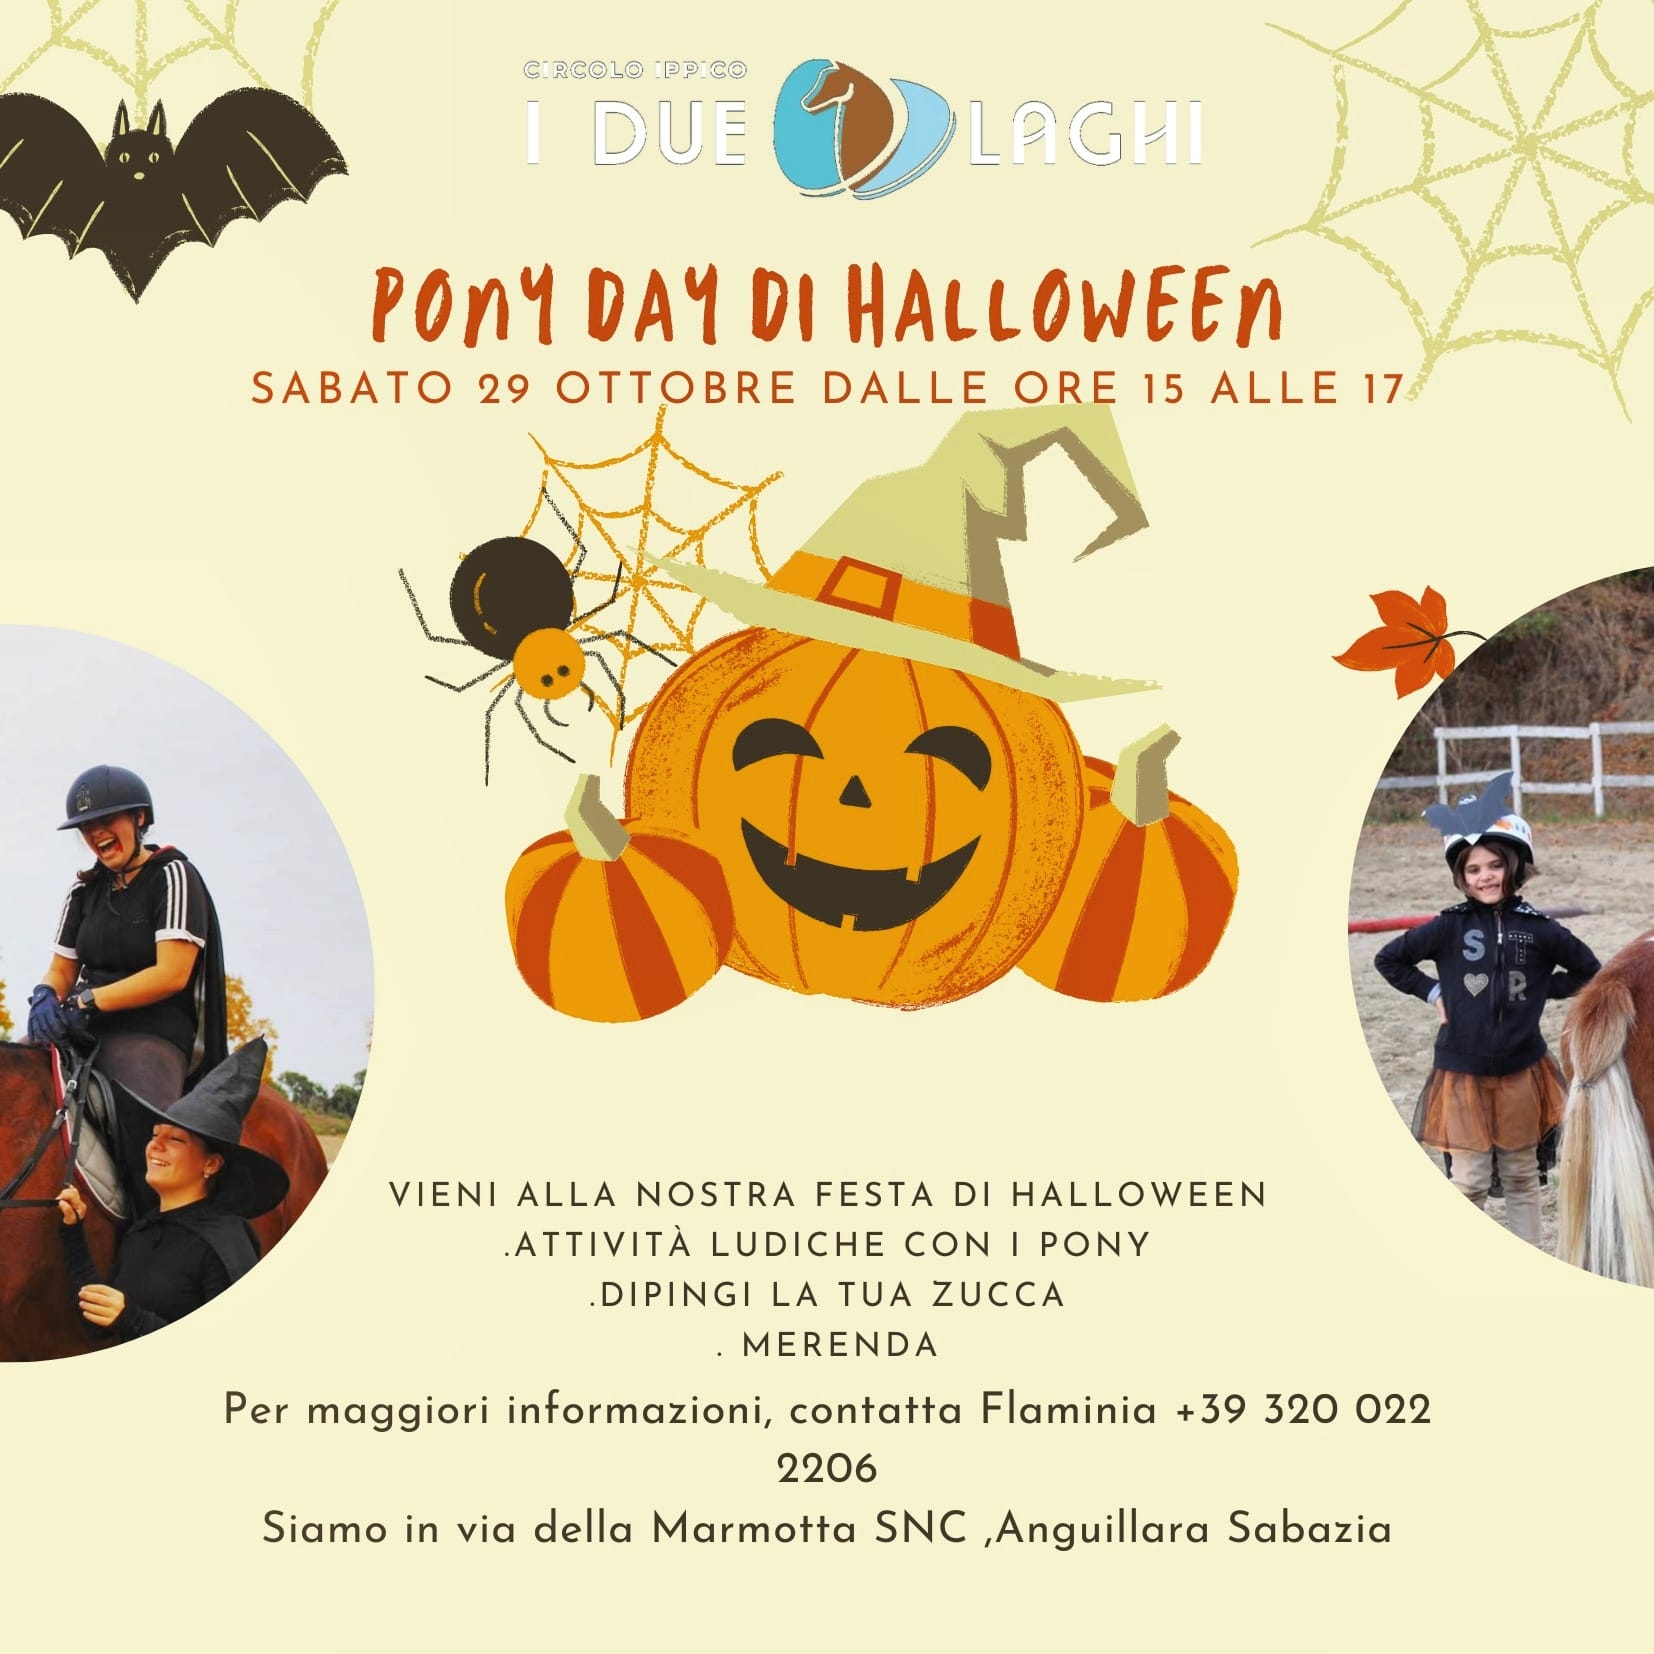 pony day di halloween i due laghi